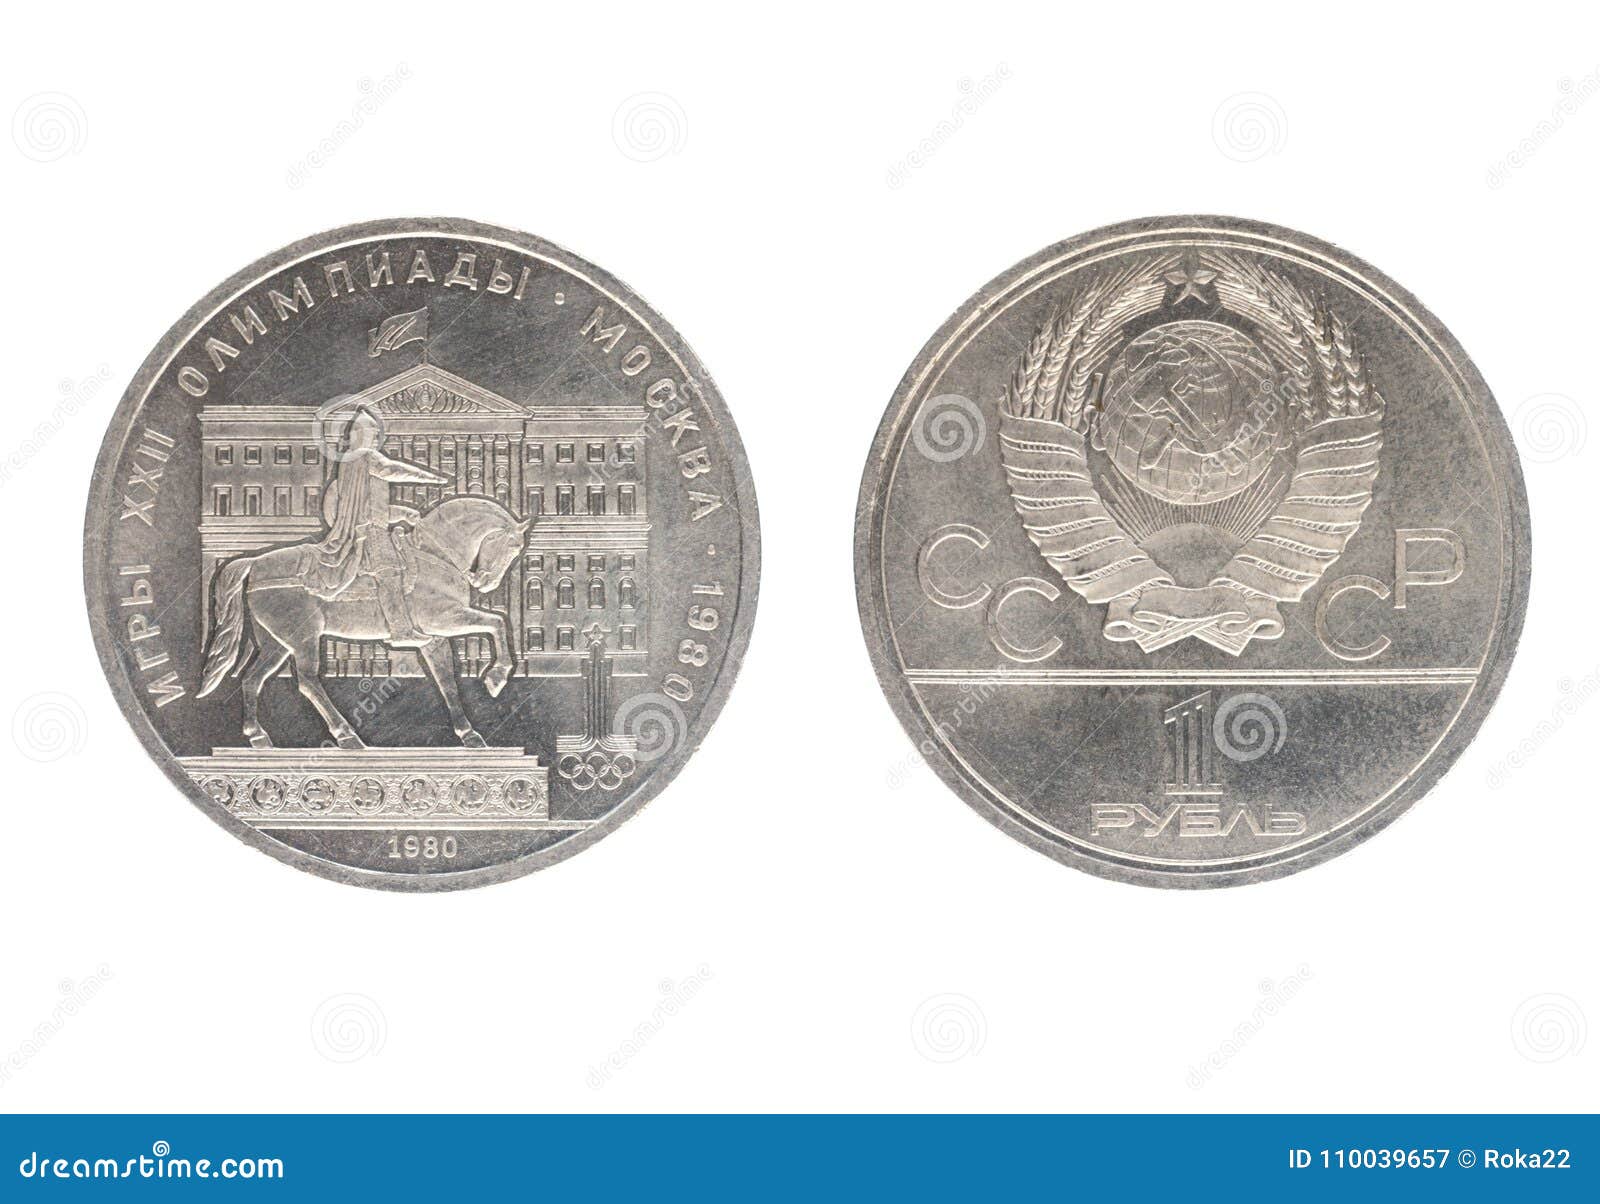 1 ruble, shows games of the xxii olympiad, moscow